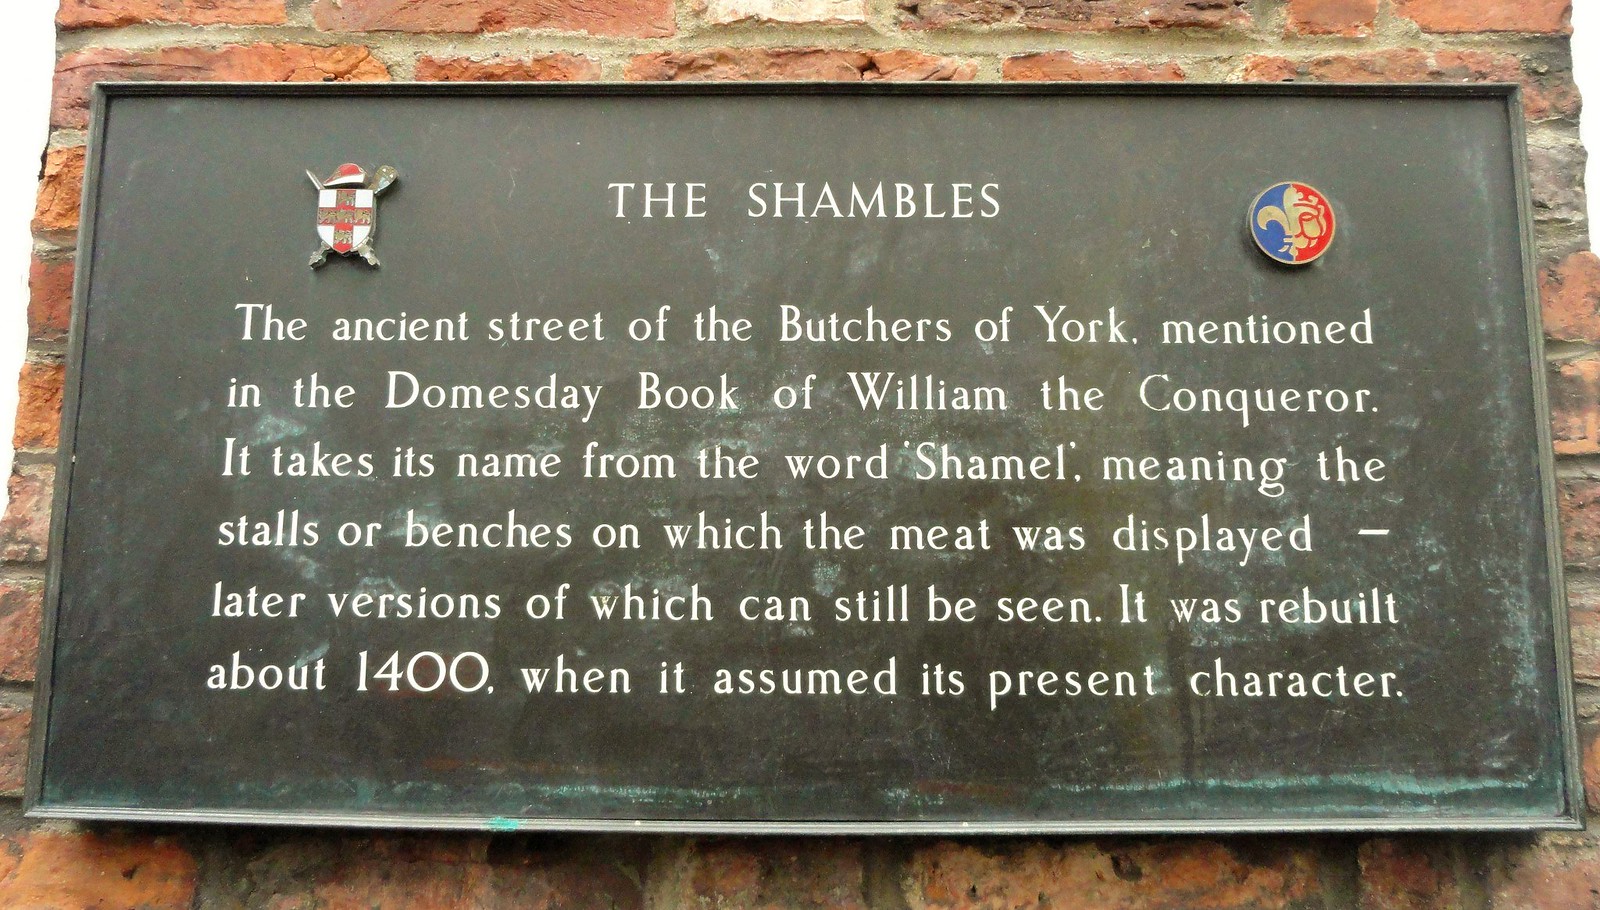 The Shambles, Heritage Plaque, York. Credit Peter Hughes